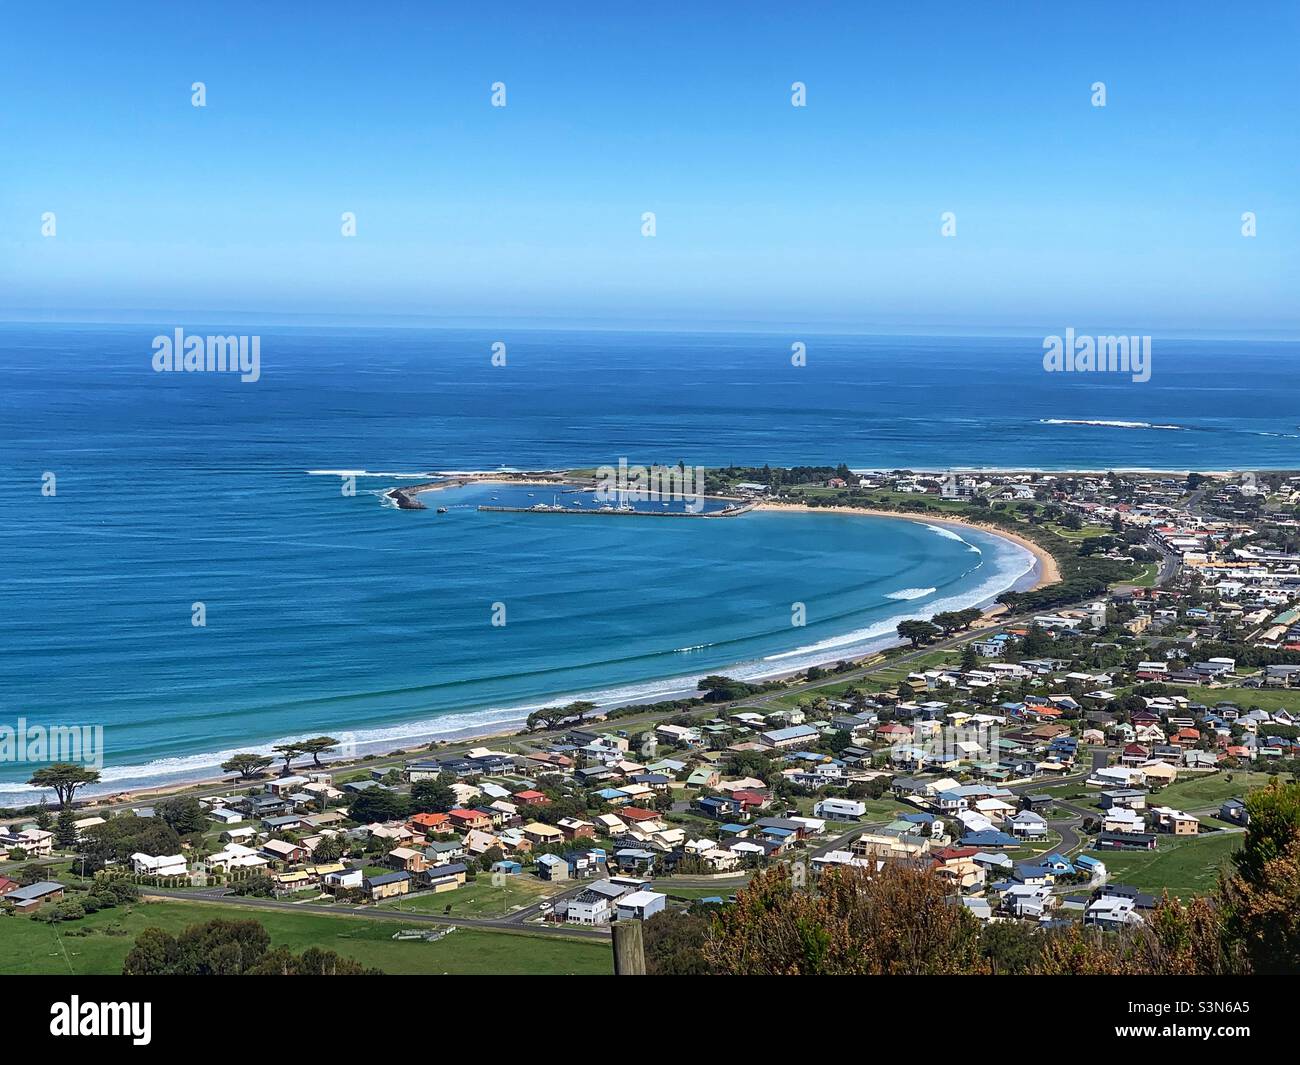 Apollo Bay is a seaside town along the famous Great Ocean Road in Victoria, Australia Stock Photo